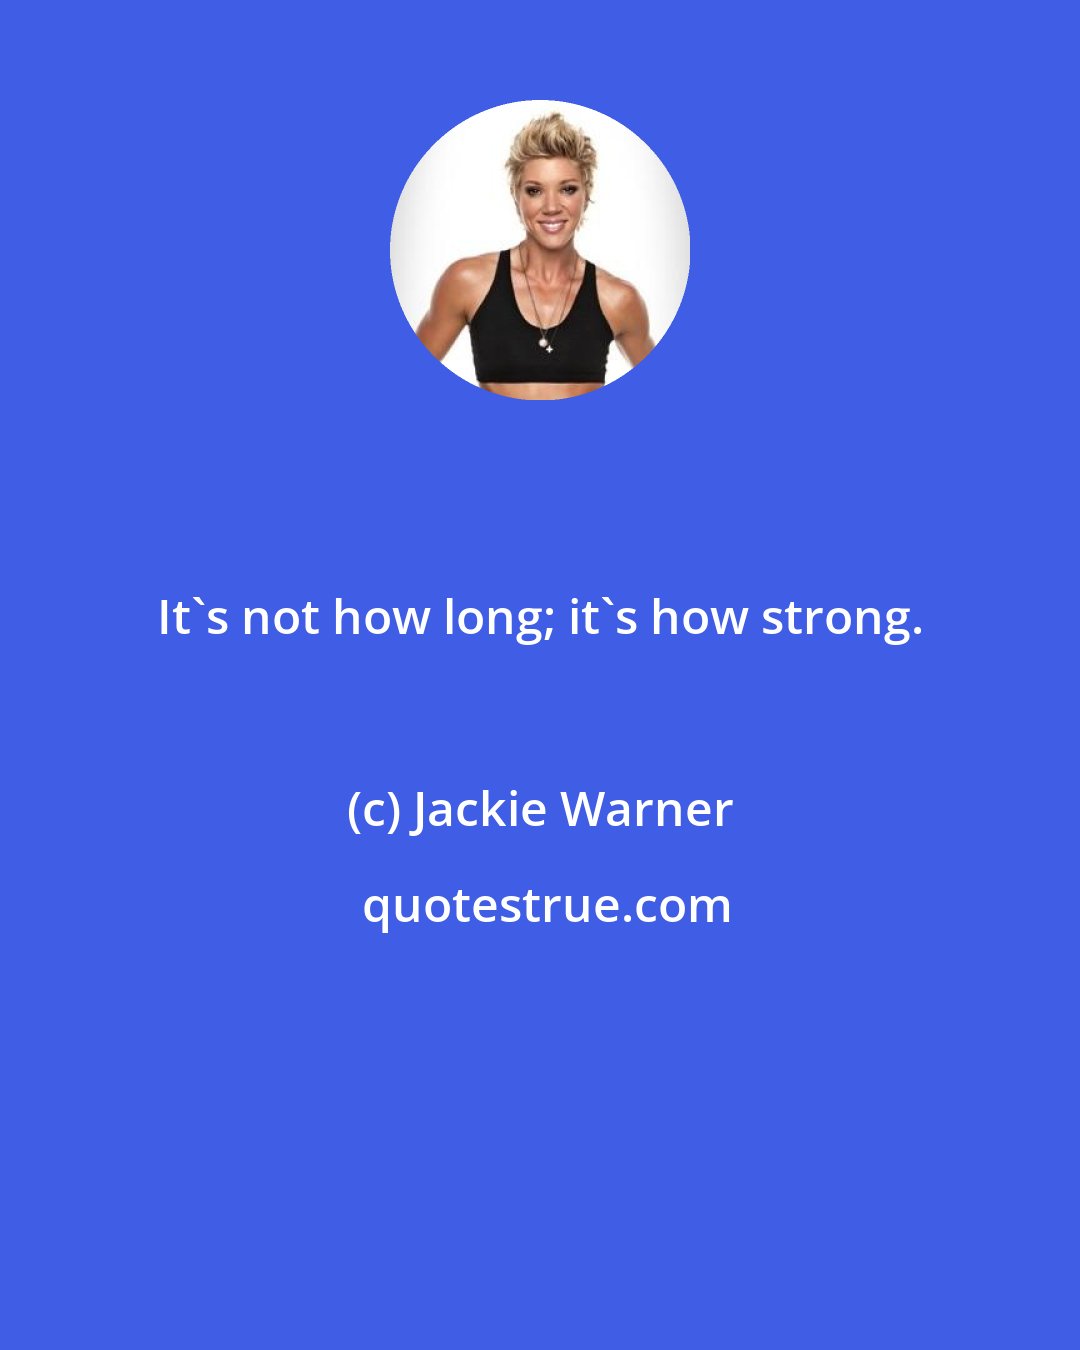 Jackie Warner: It's not how long; it's how strong.